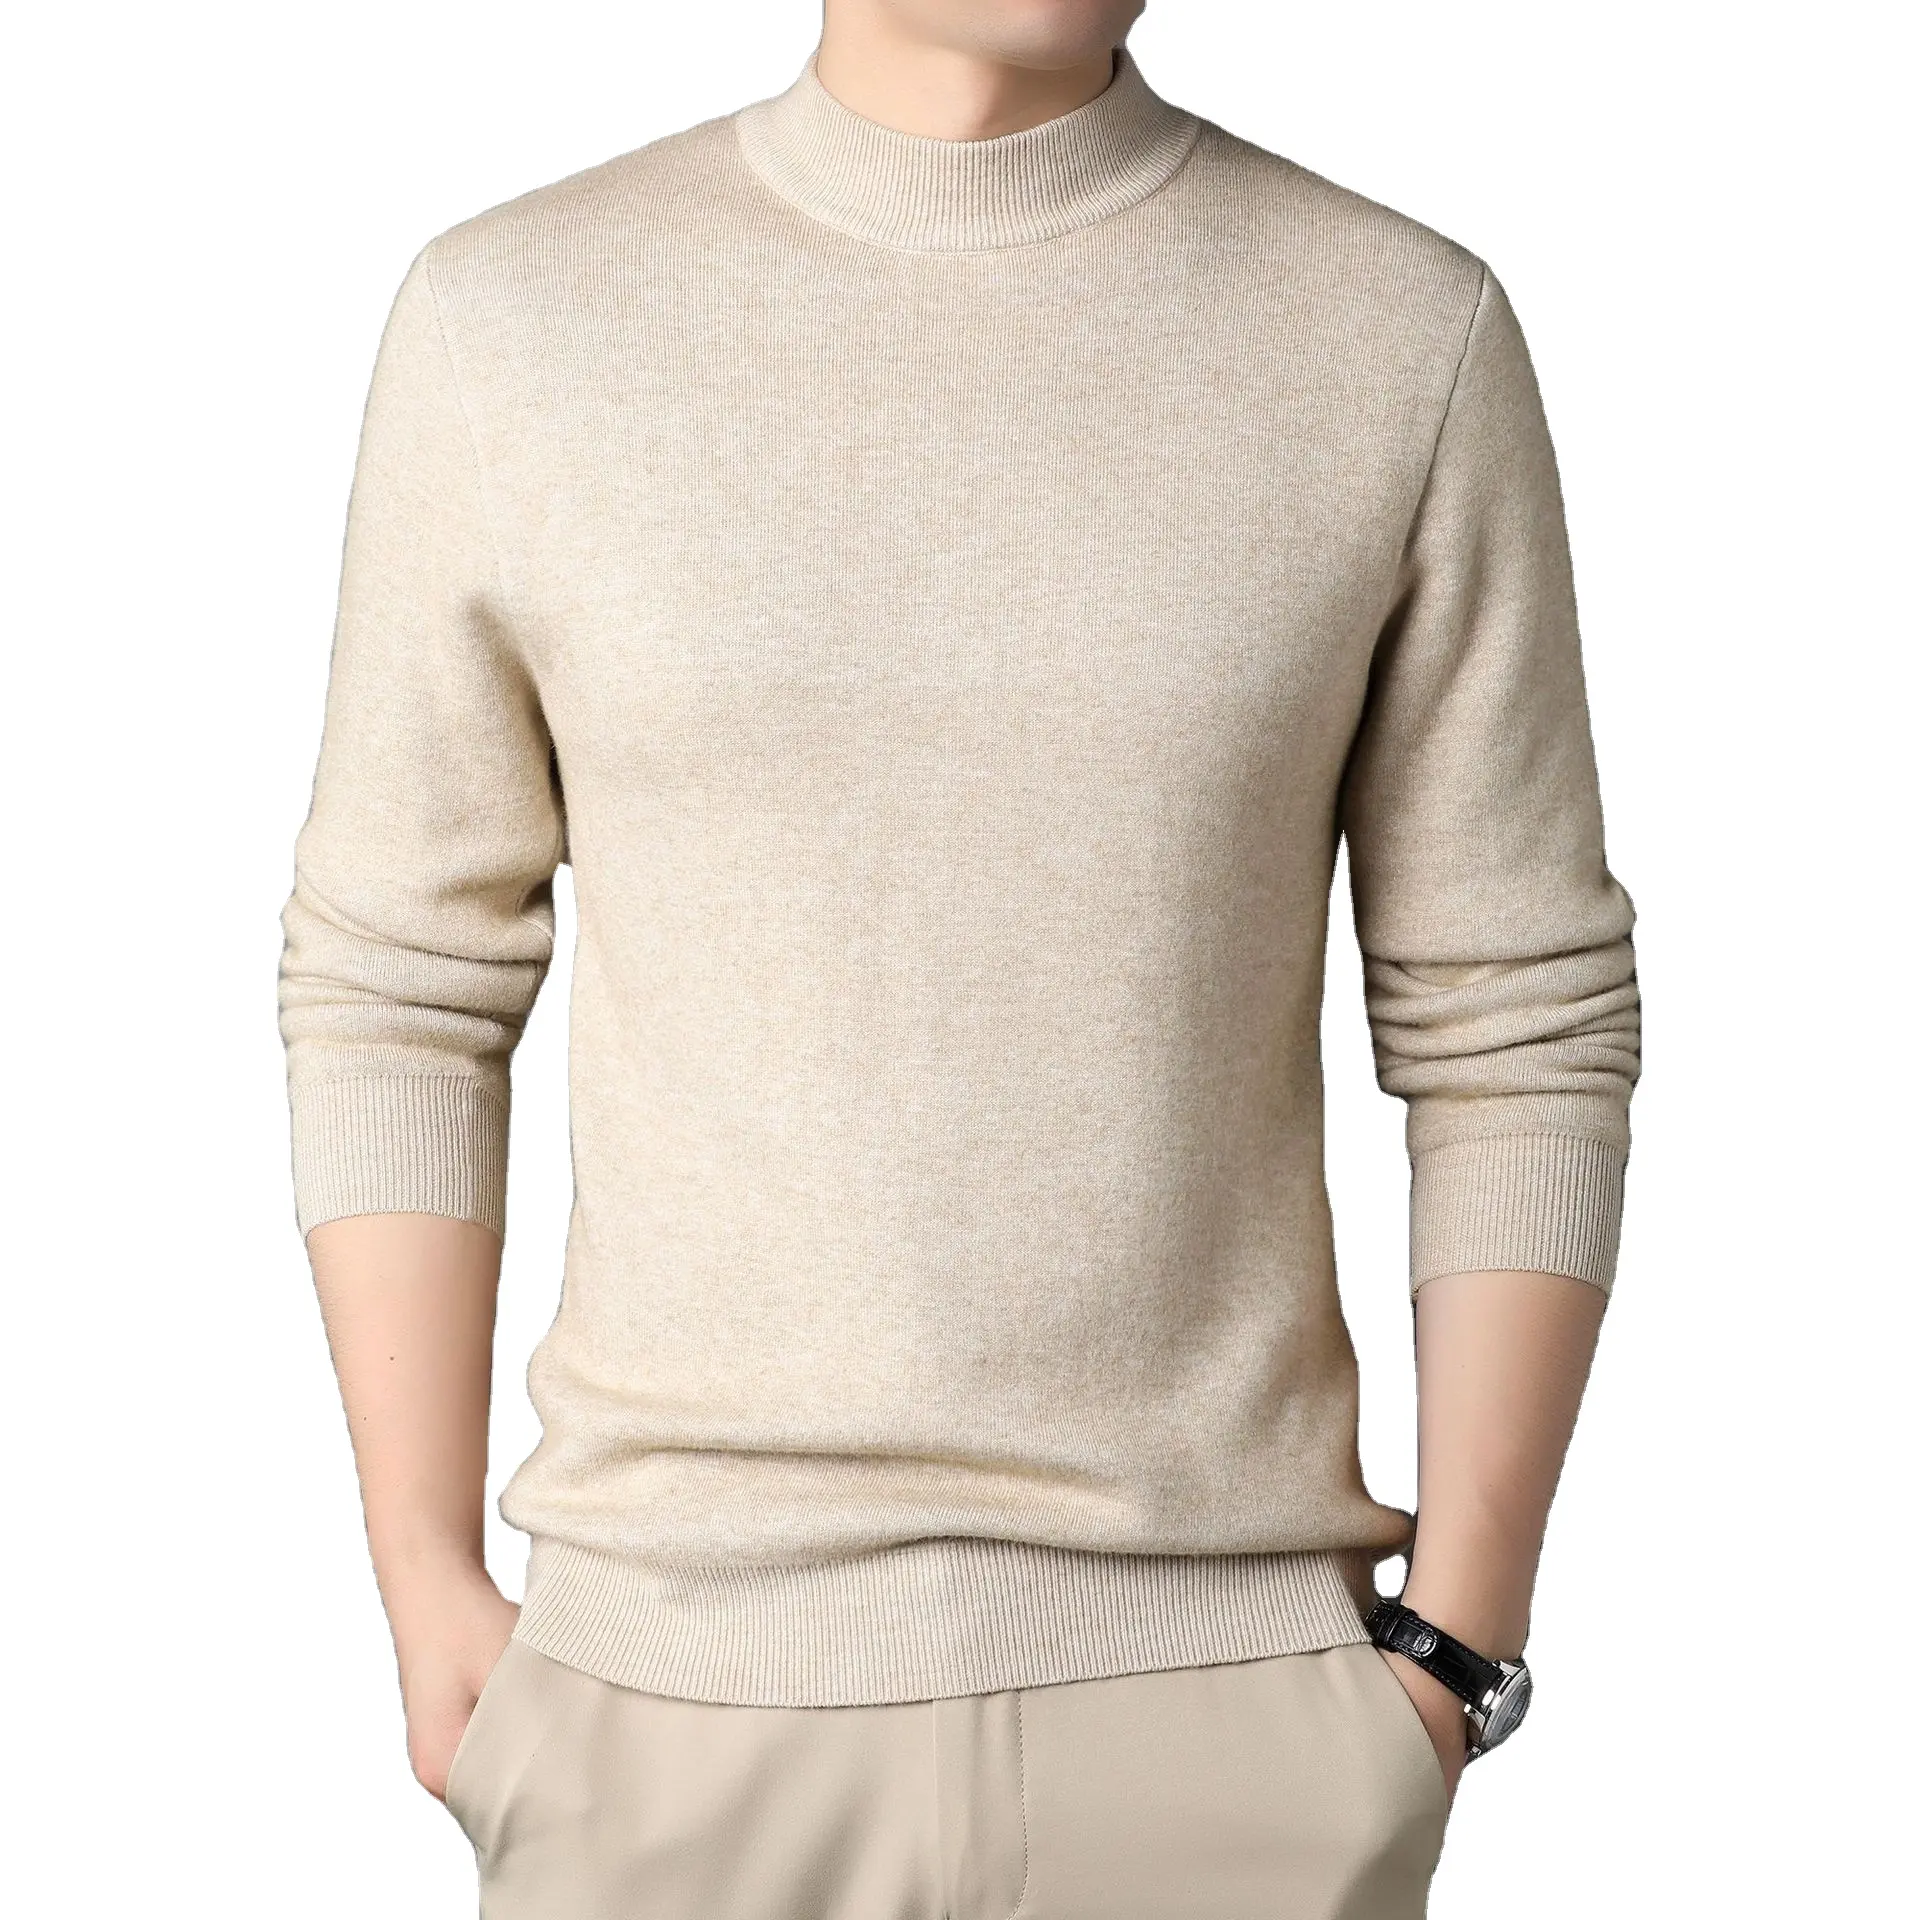 Long Sleeve Sweater For Autumn And Winter Bas Warm Outdoor Recreation Sweater Top For Men